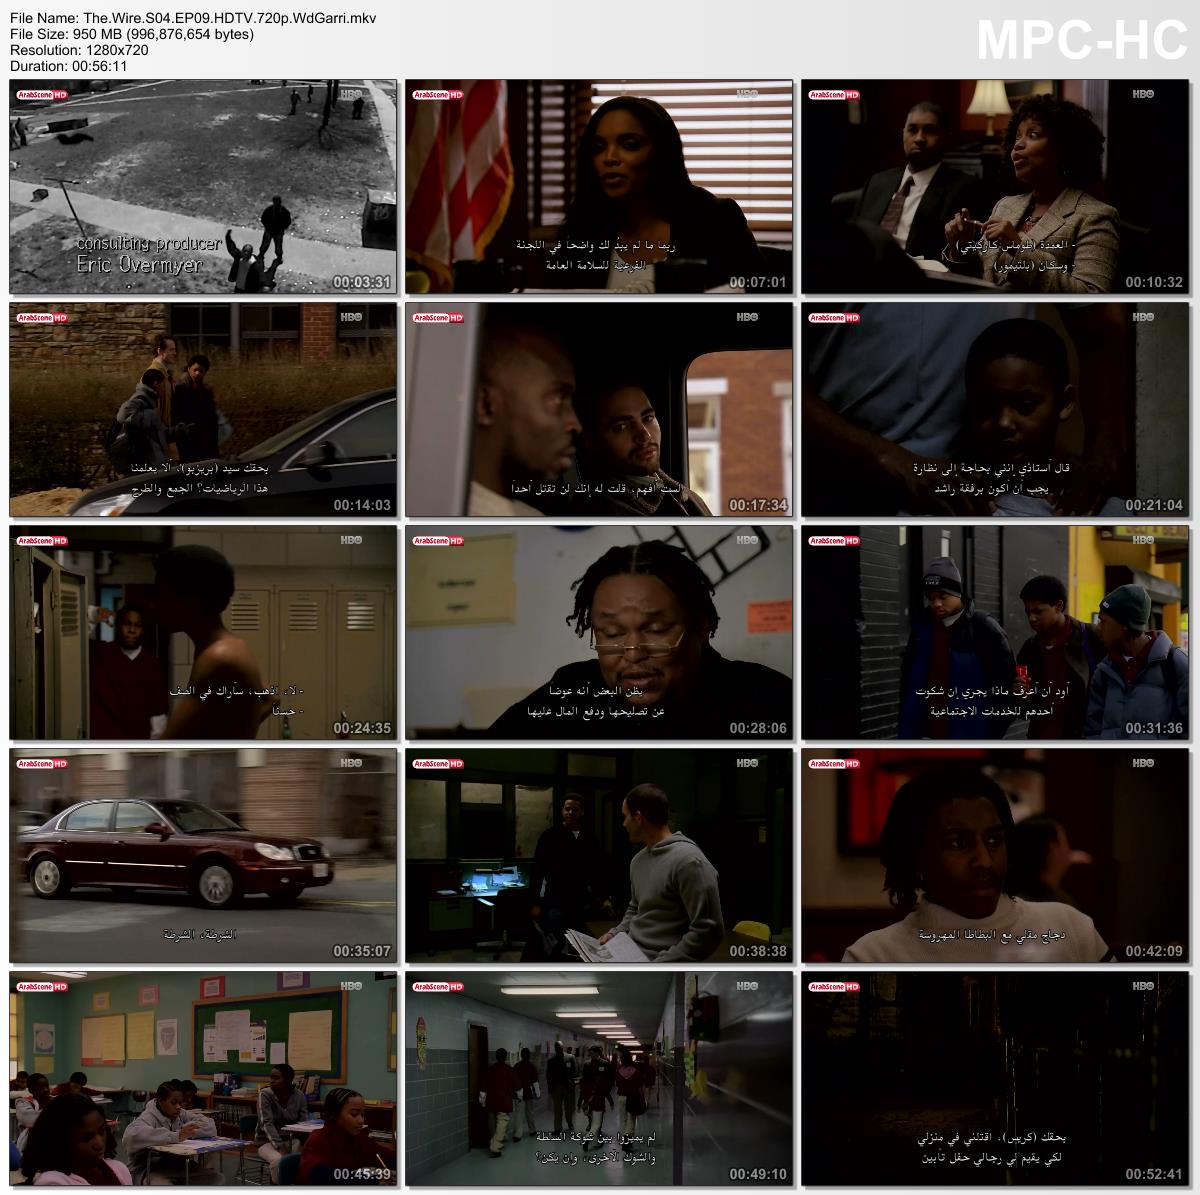 the wire torrent